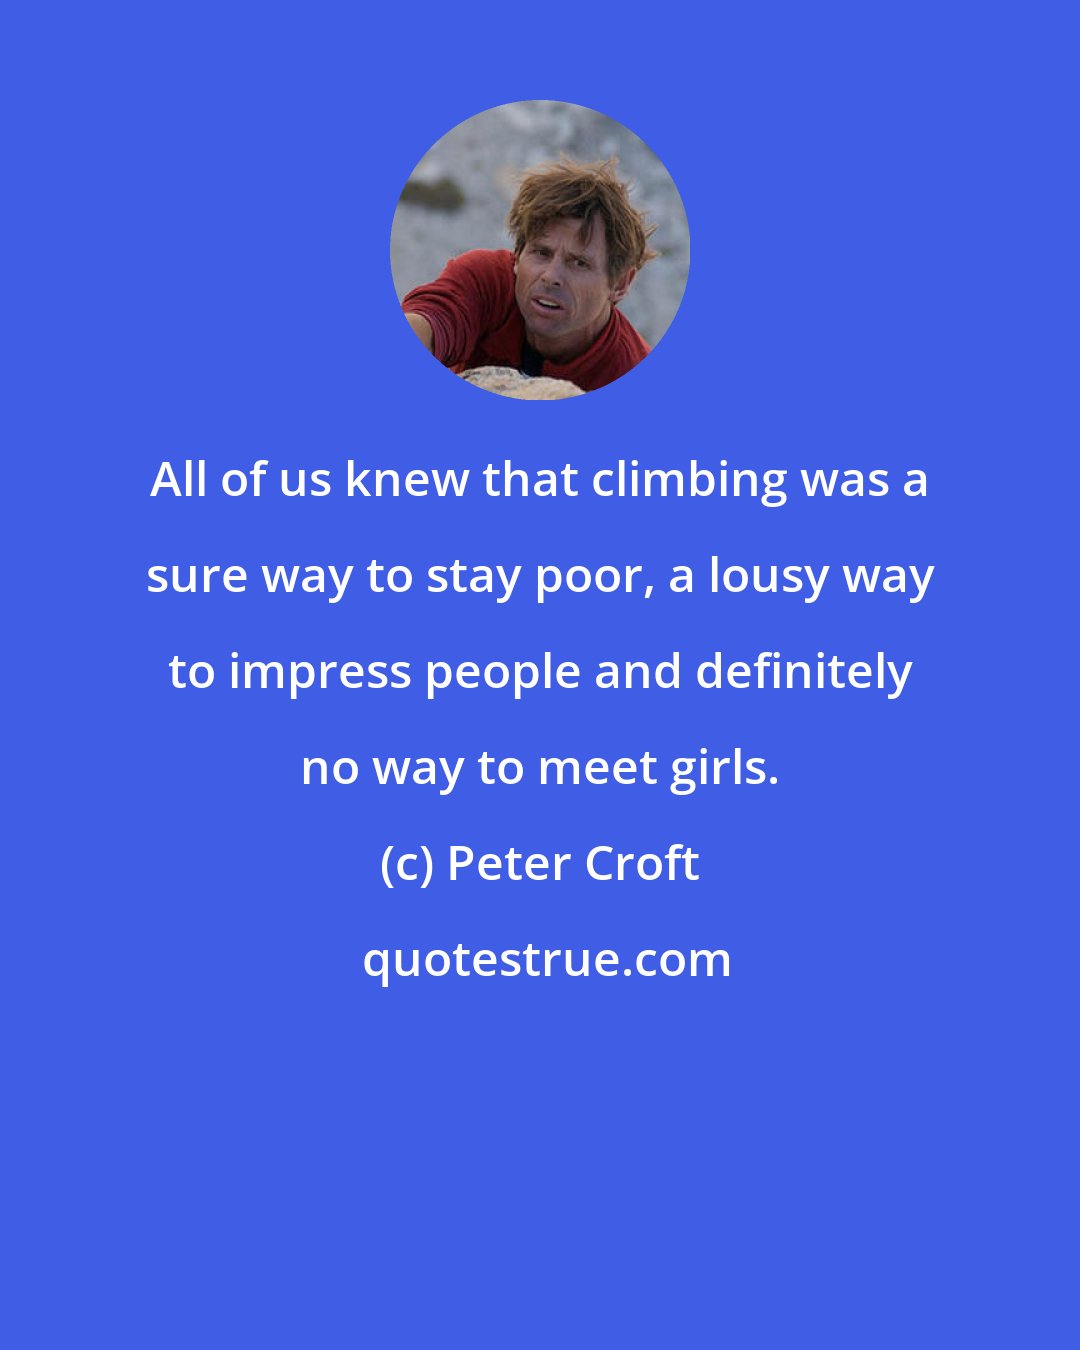 Peter Croft: All of us knew that climbing was a sure way to stay poor, a lousy way to impress people and definitely no way to meet girls.